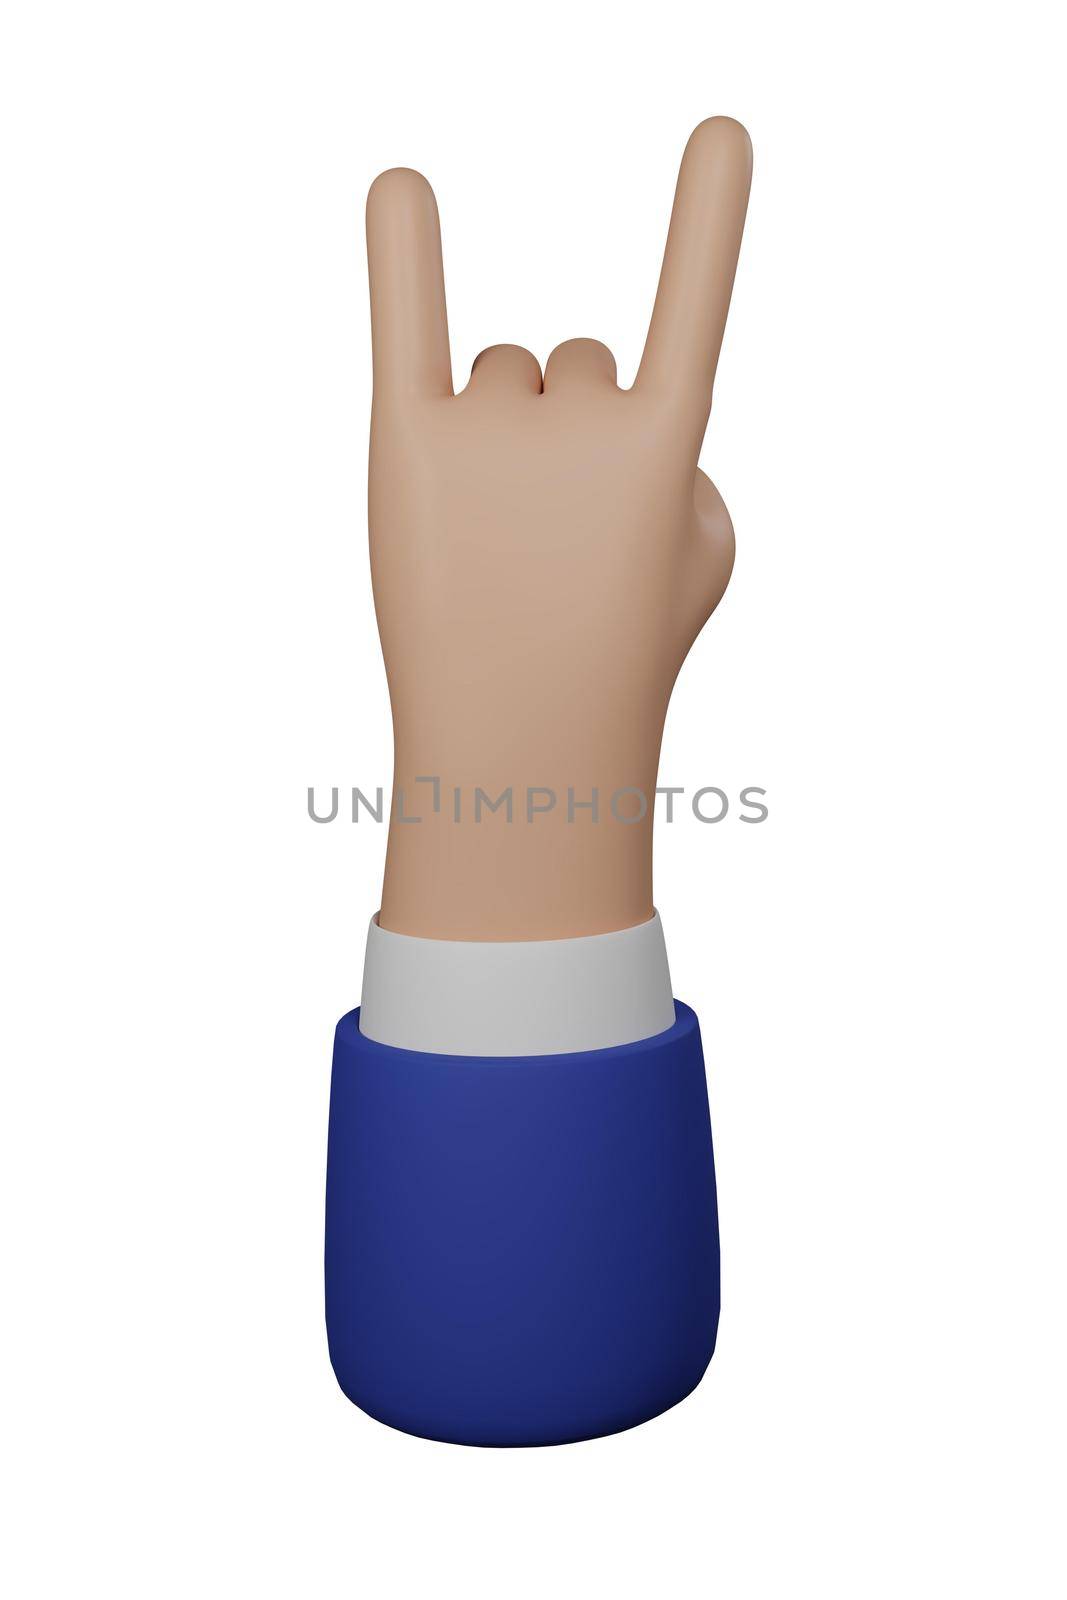 3D Cartoon businessman character hand isolated on white background. Hand gesture friendly funny style. 3d rendering.